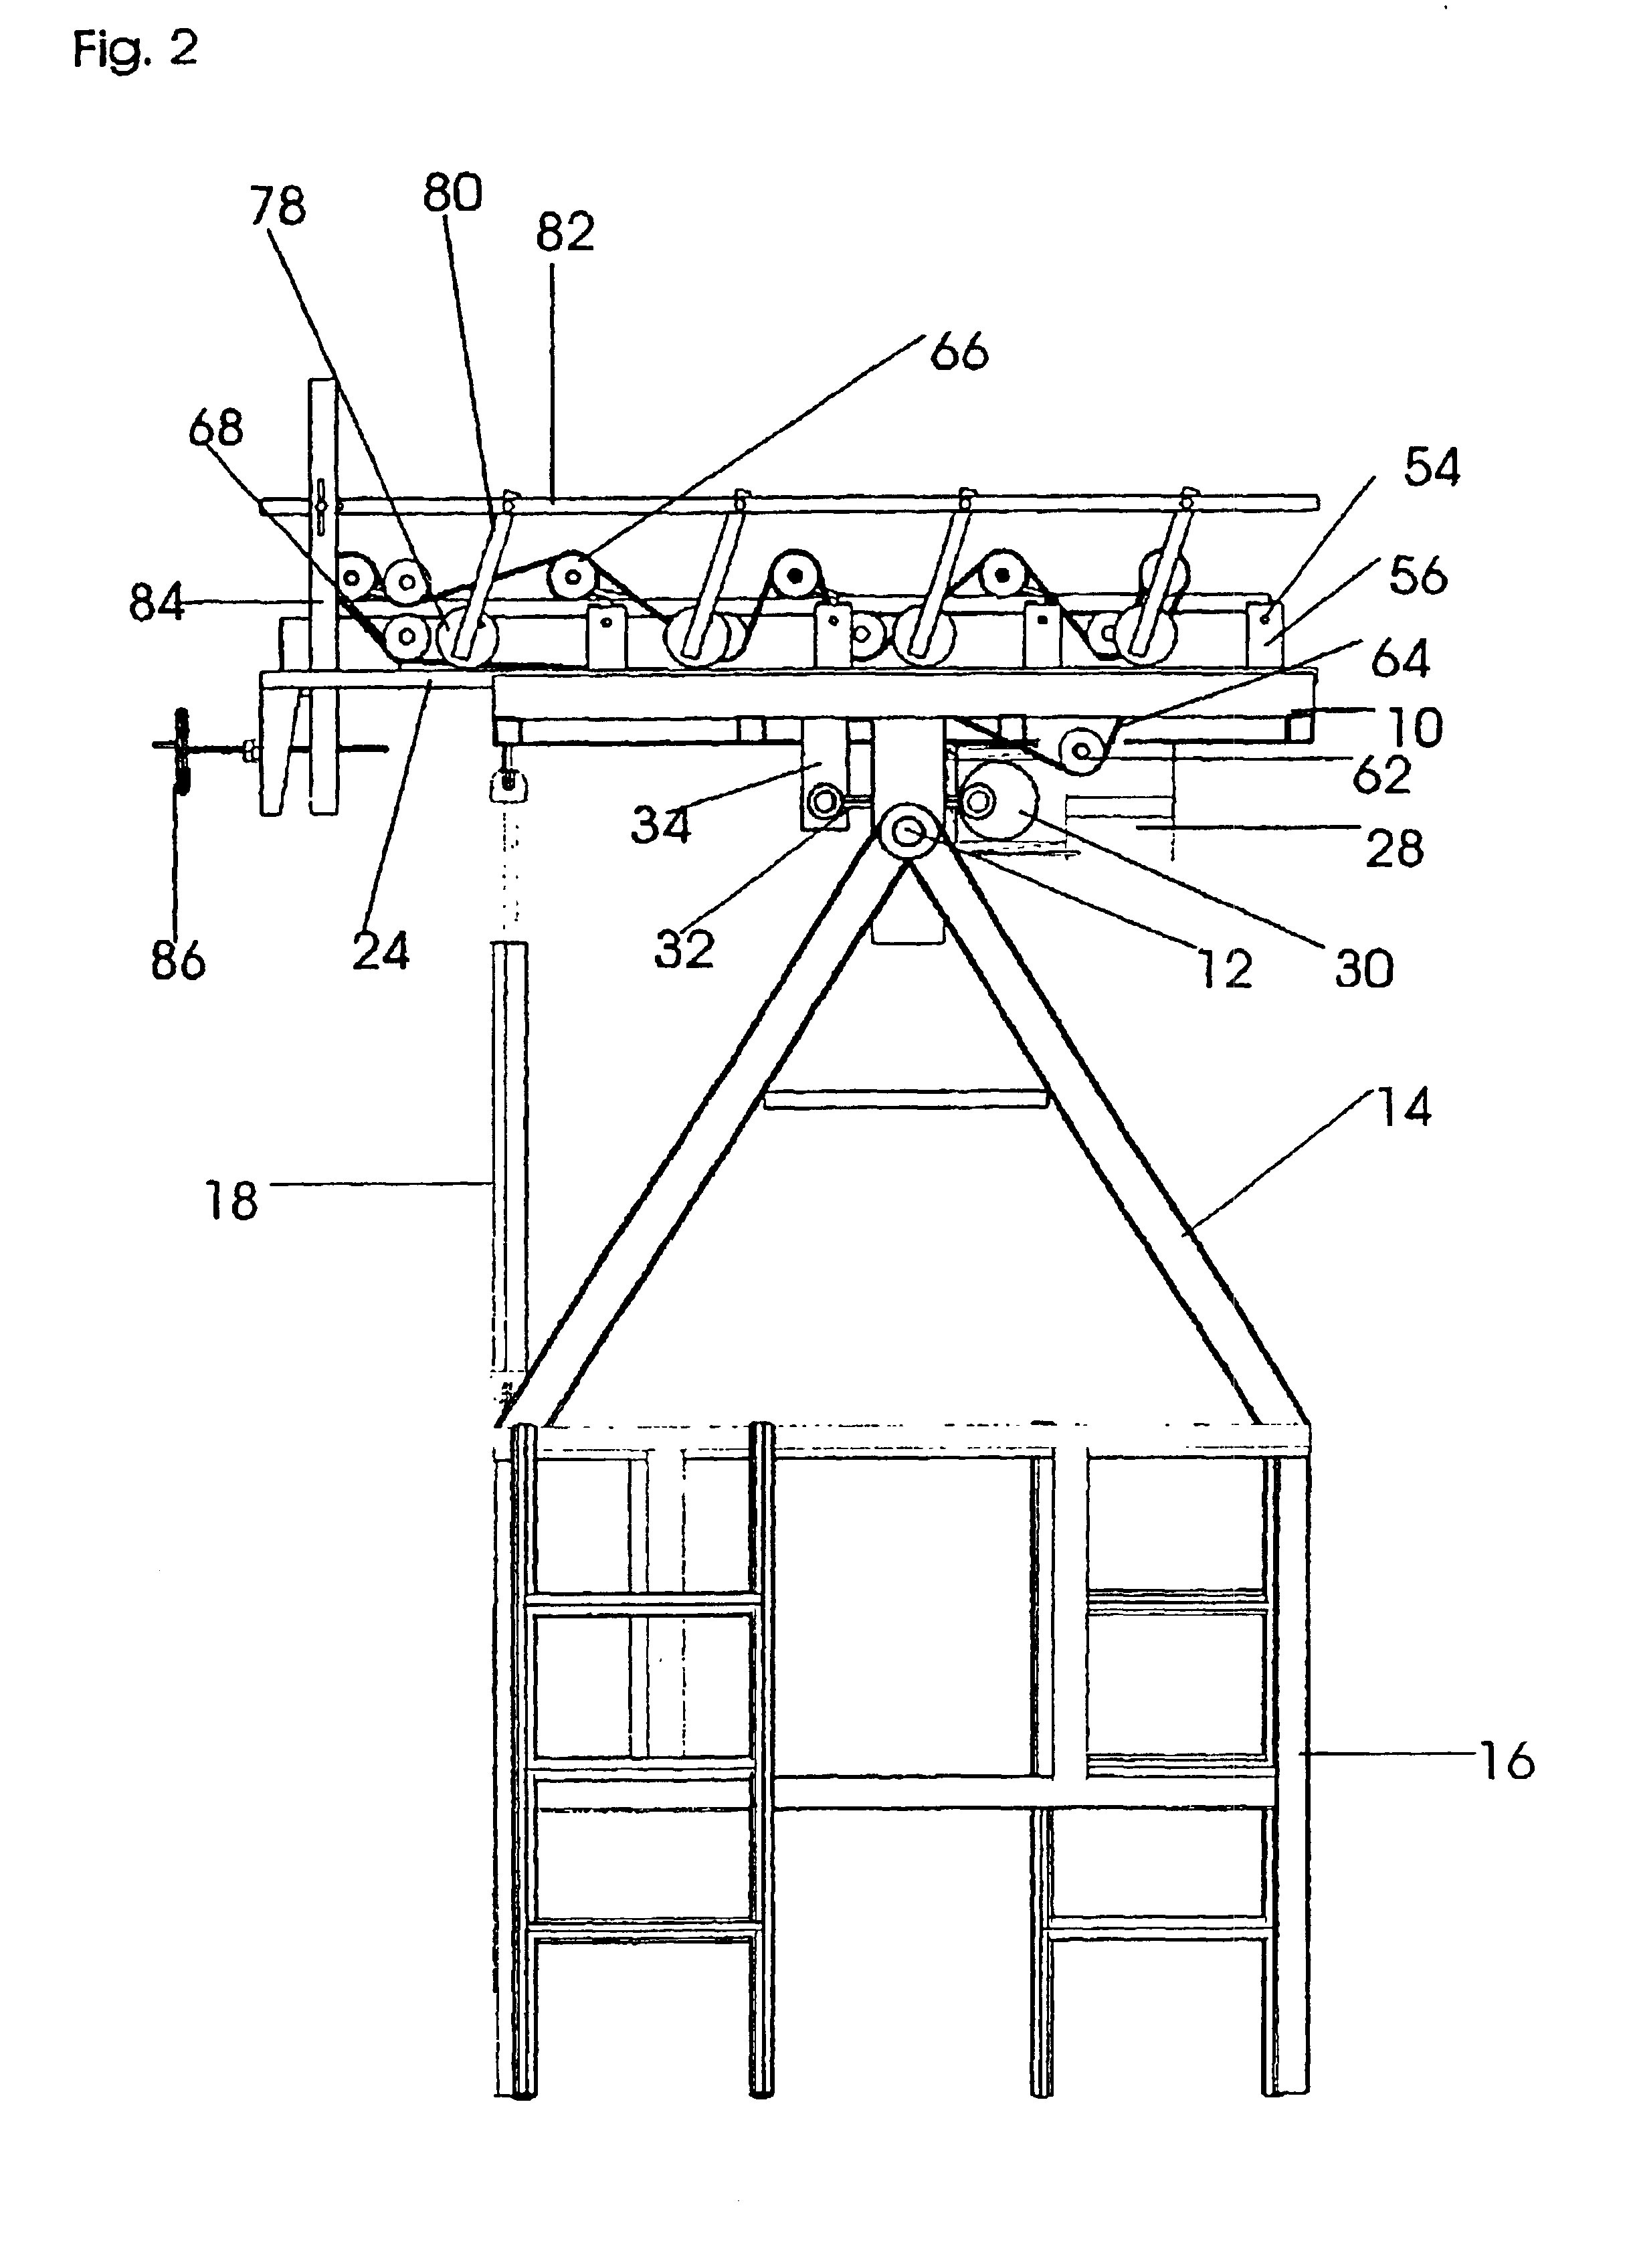 Apparatus and method for declustering cherries